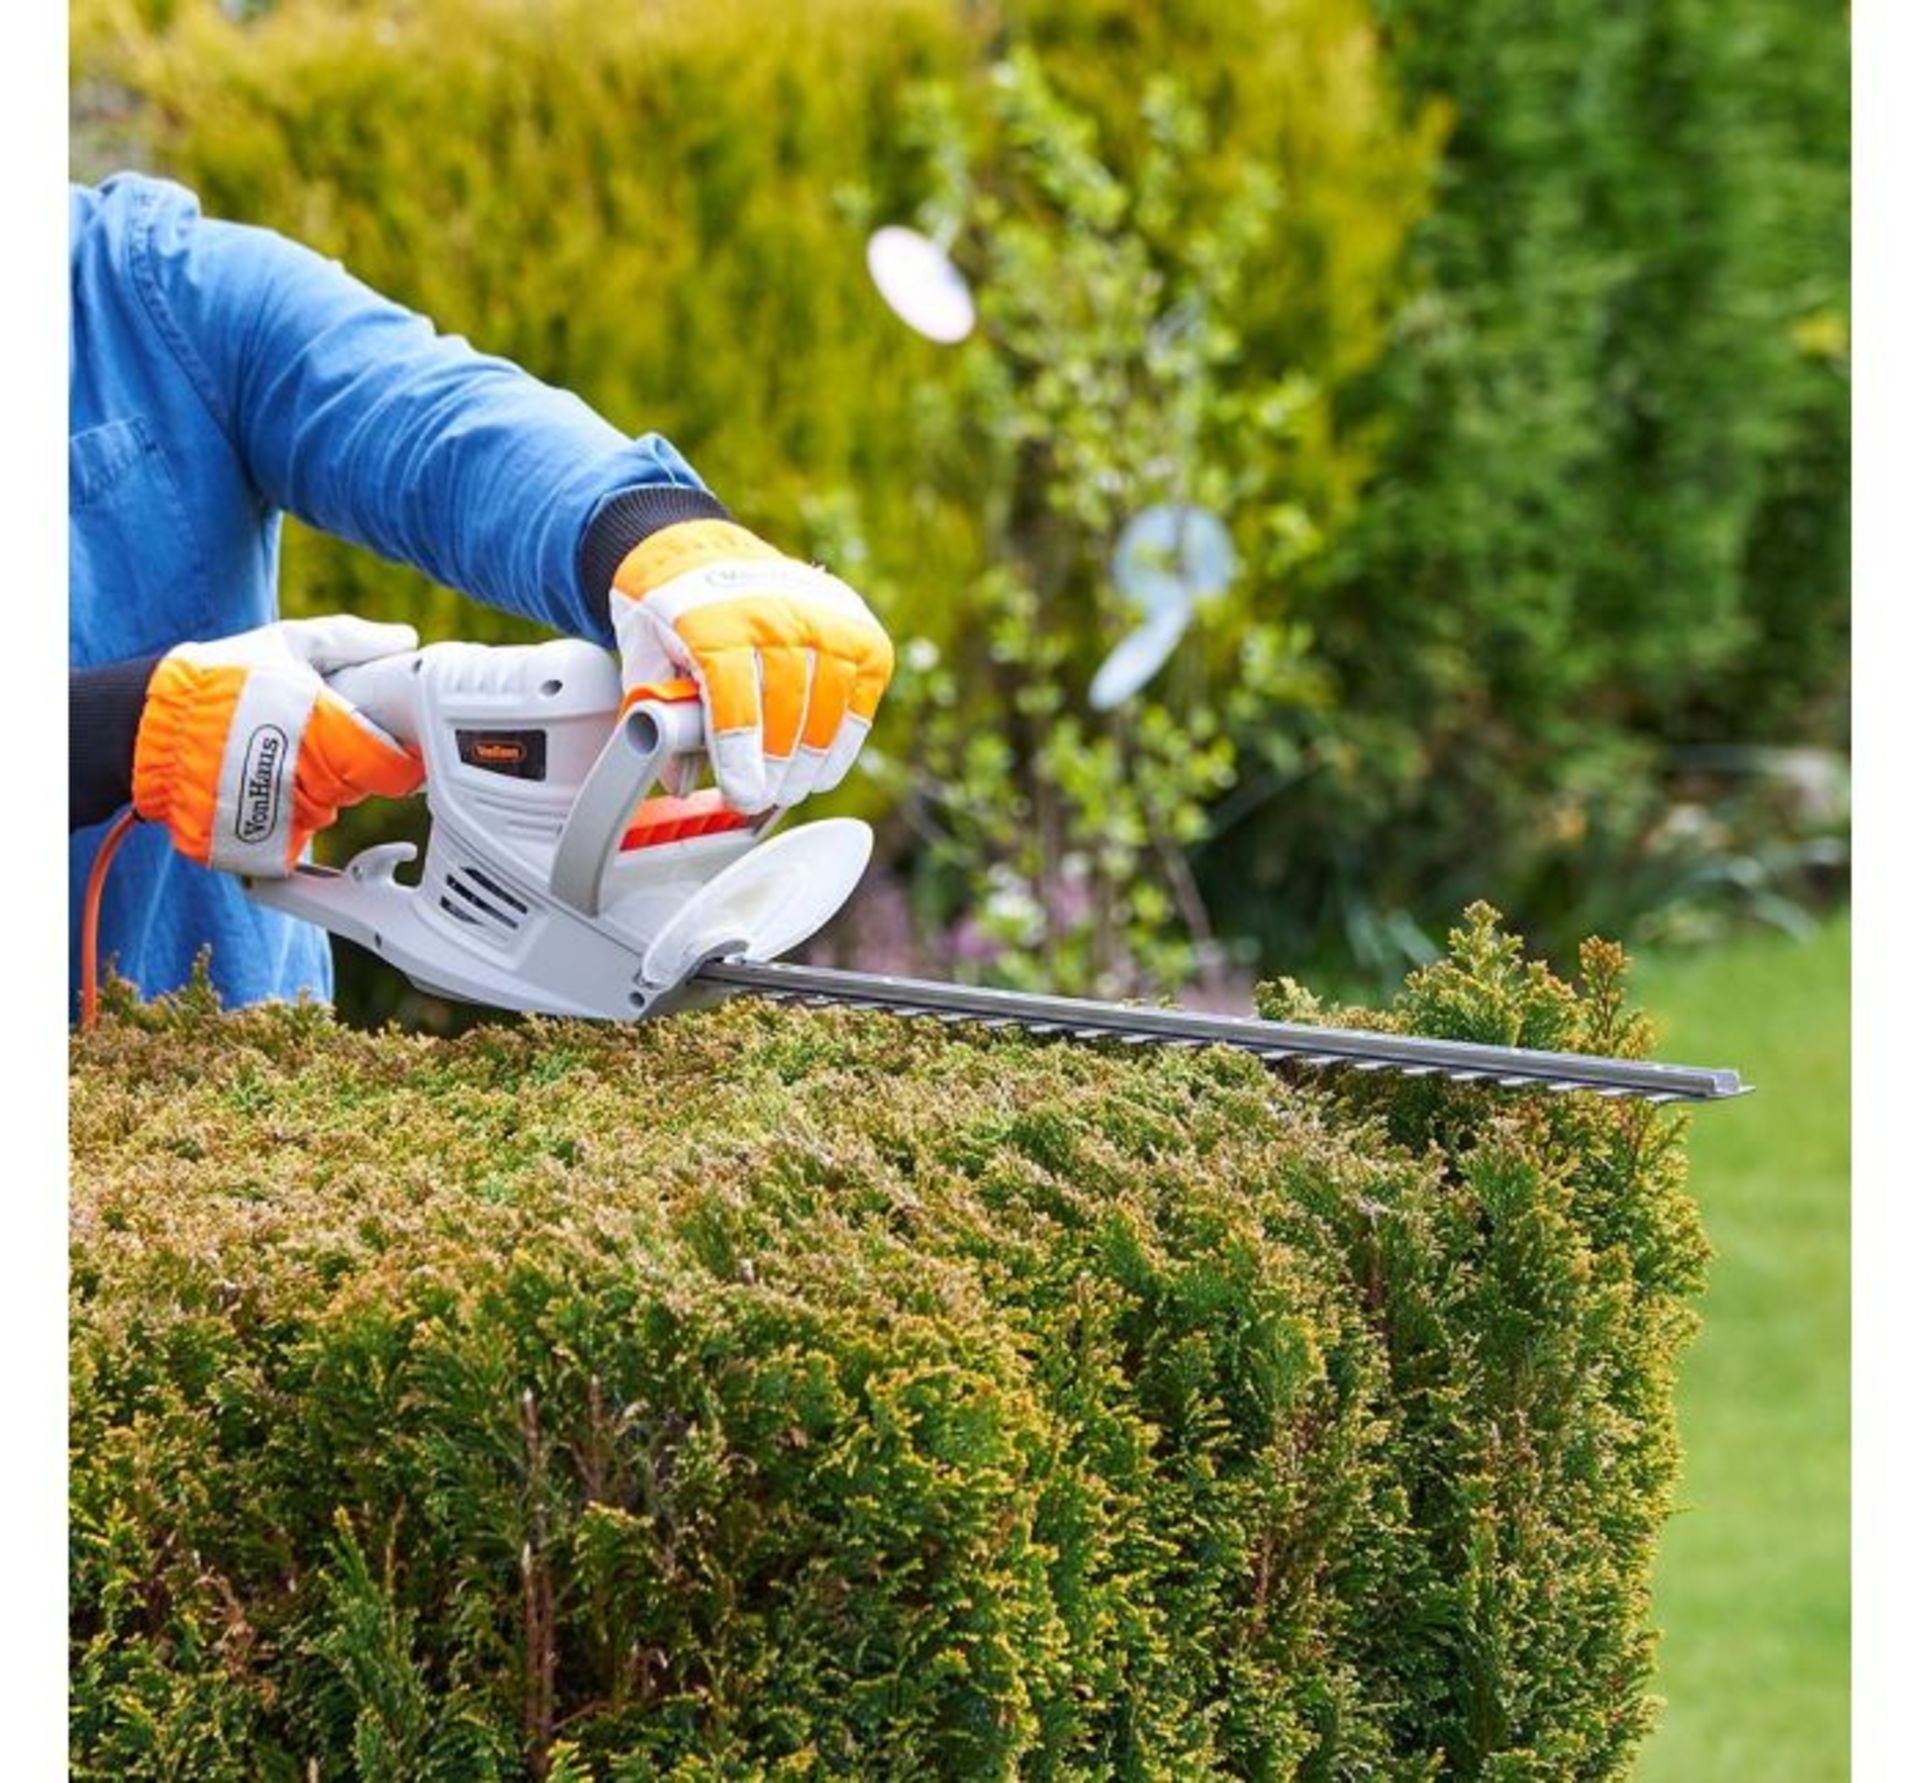 (F57) 550W Hedge Trimmer Lightweight at only 3.2kg with a powerful 550W motor and precision bl... - Image 3 of 3